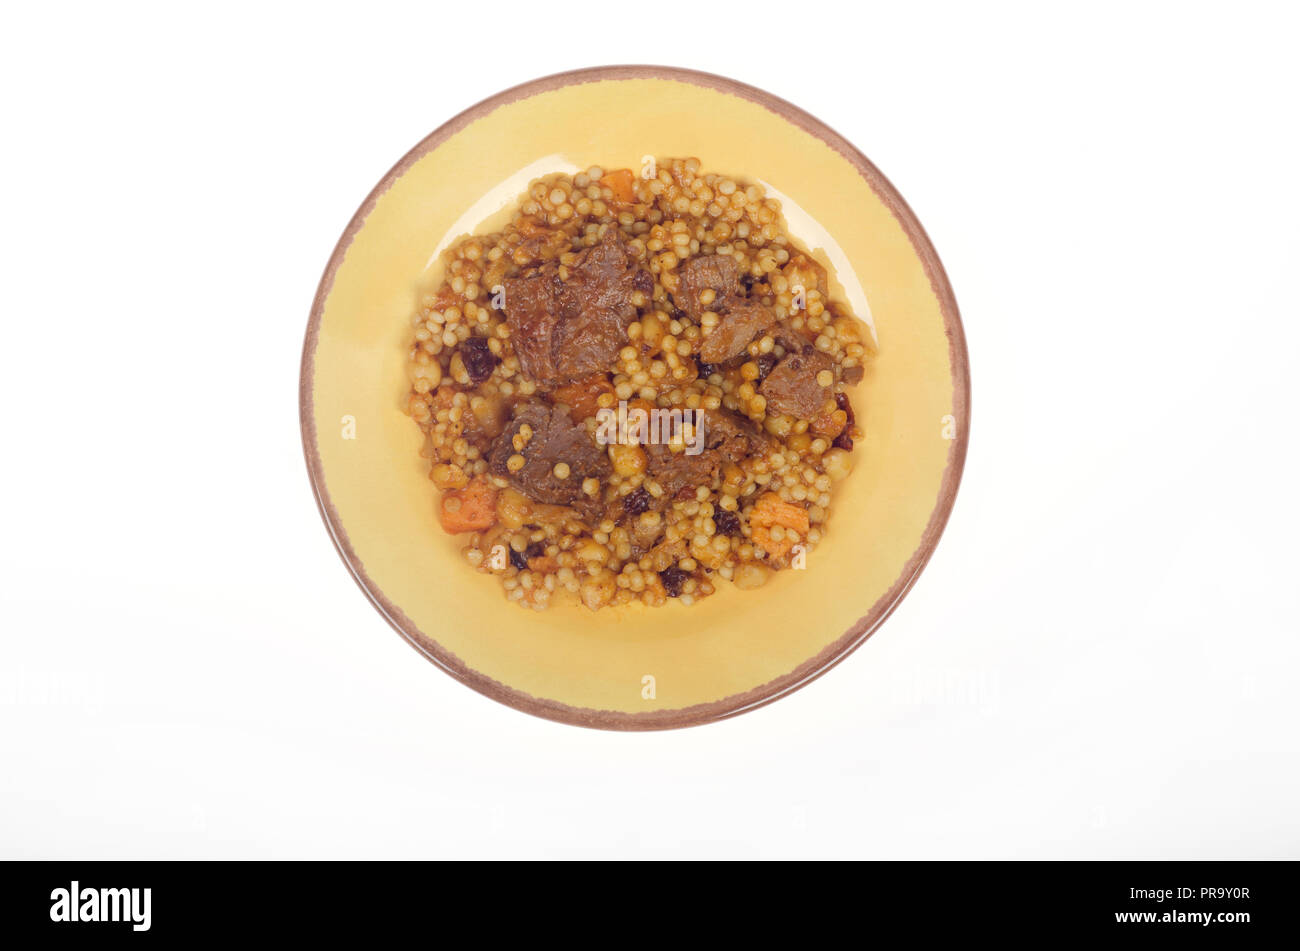 Plate of Morrocan style beef with couscous, carrots and chick peas from above Stock Photo